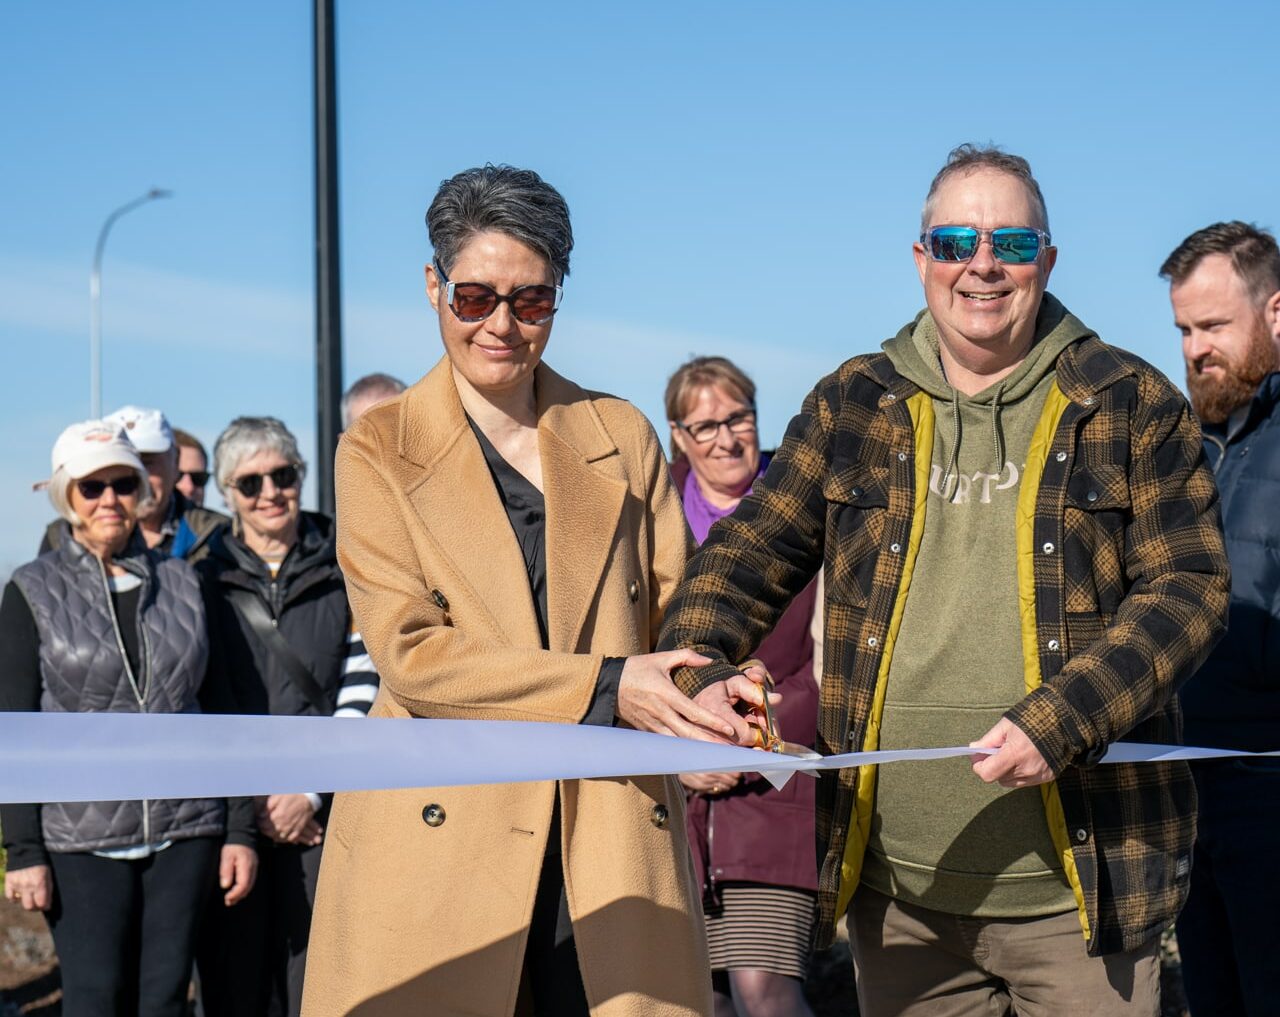 Steve and Thea Farquharson cutting the ribbon at ceremony.